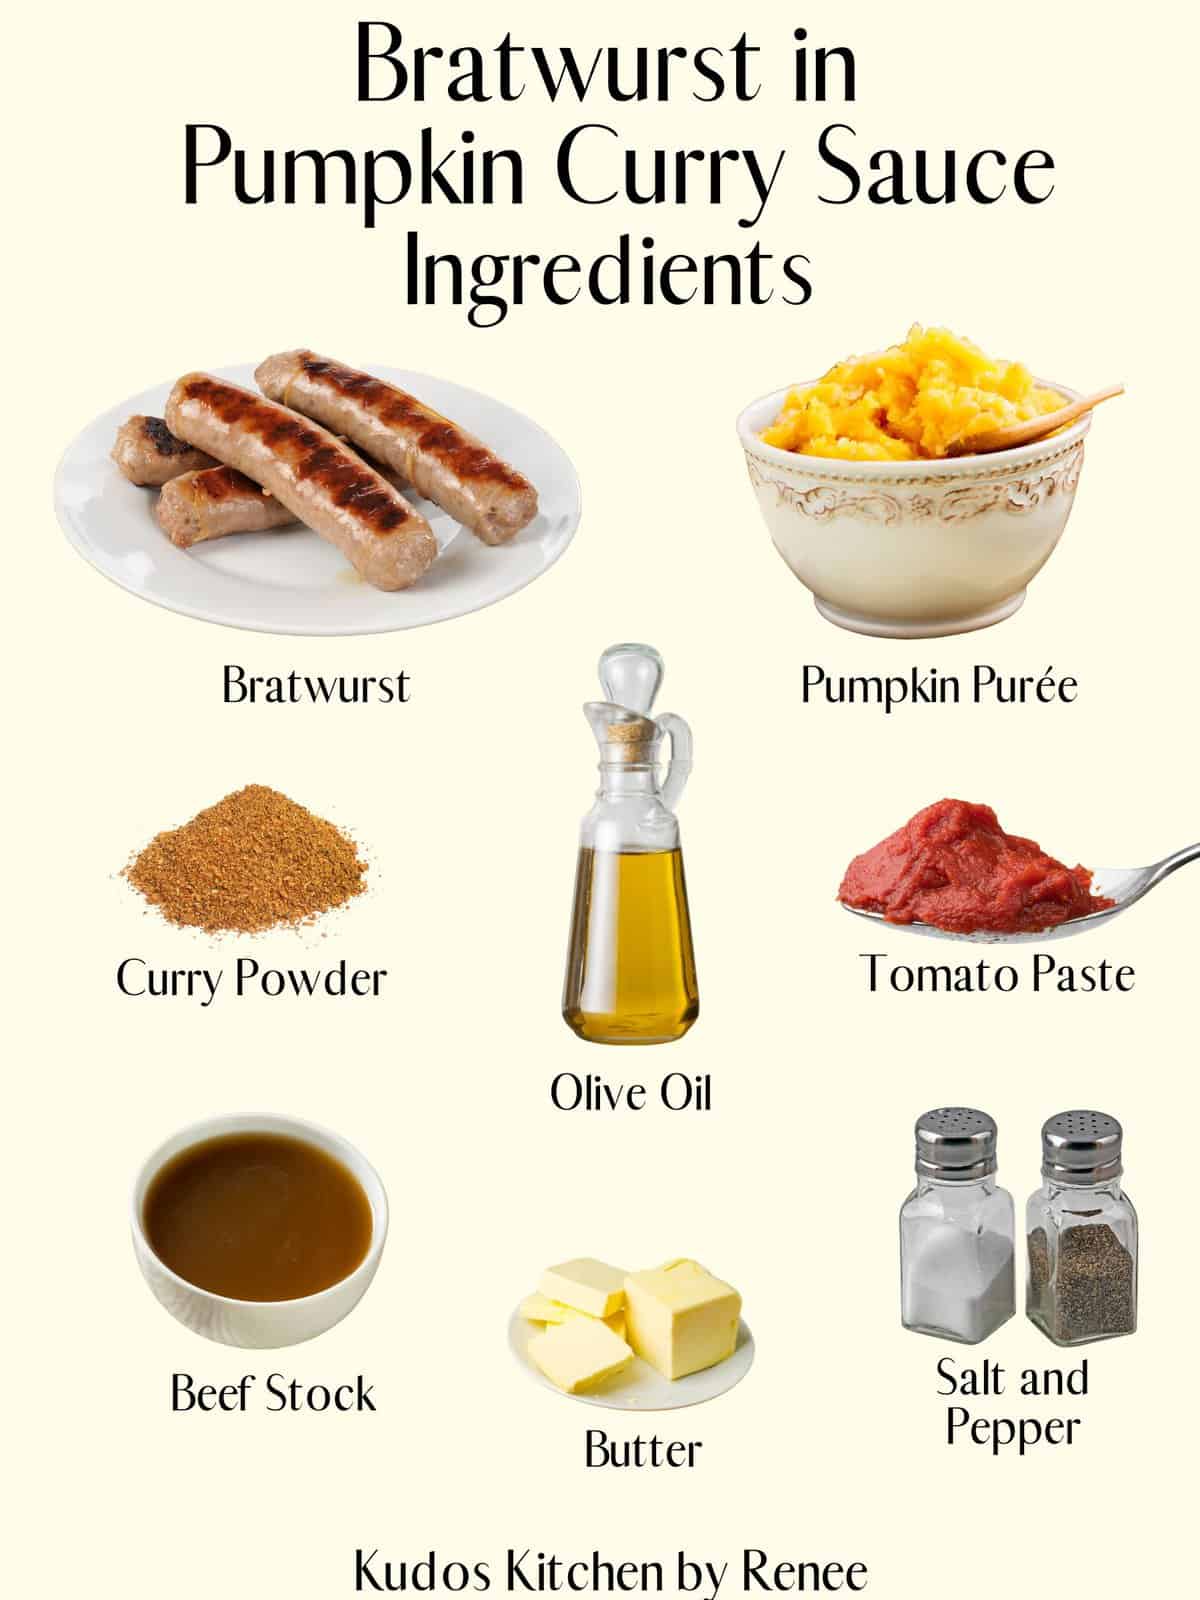 A visual ingredient list for how to make Bratwurst in Pumpkin Curry Sauce.